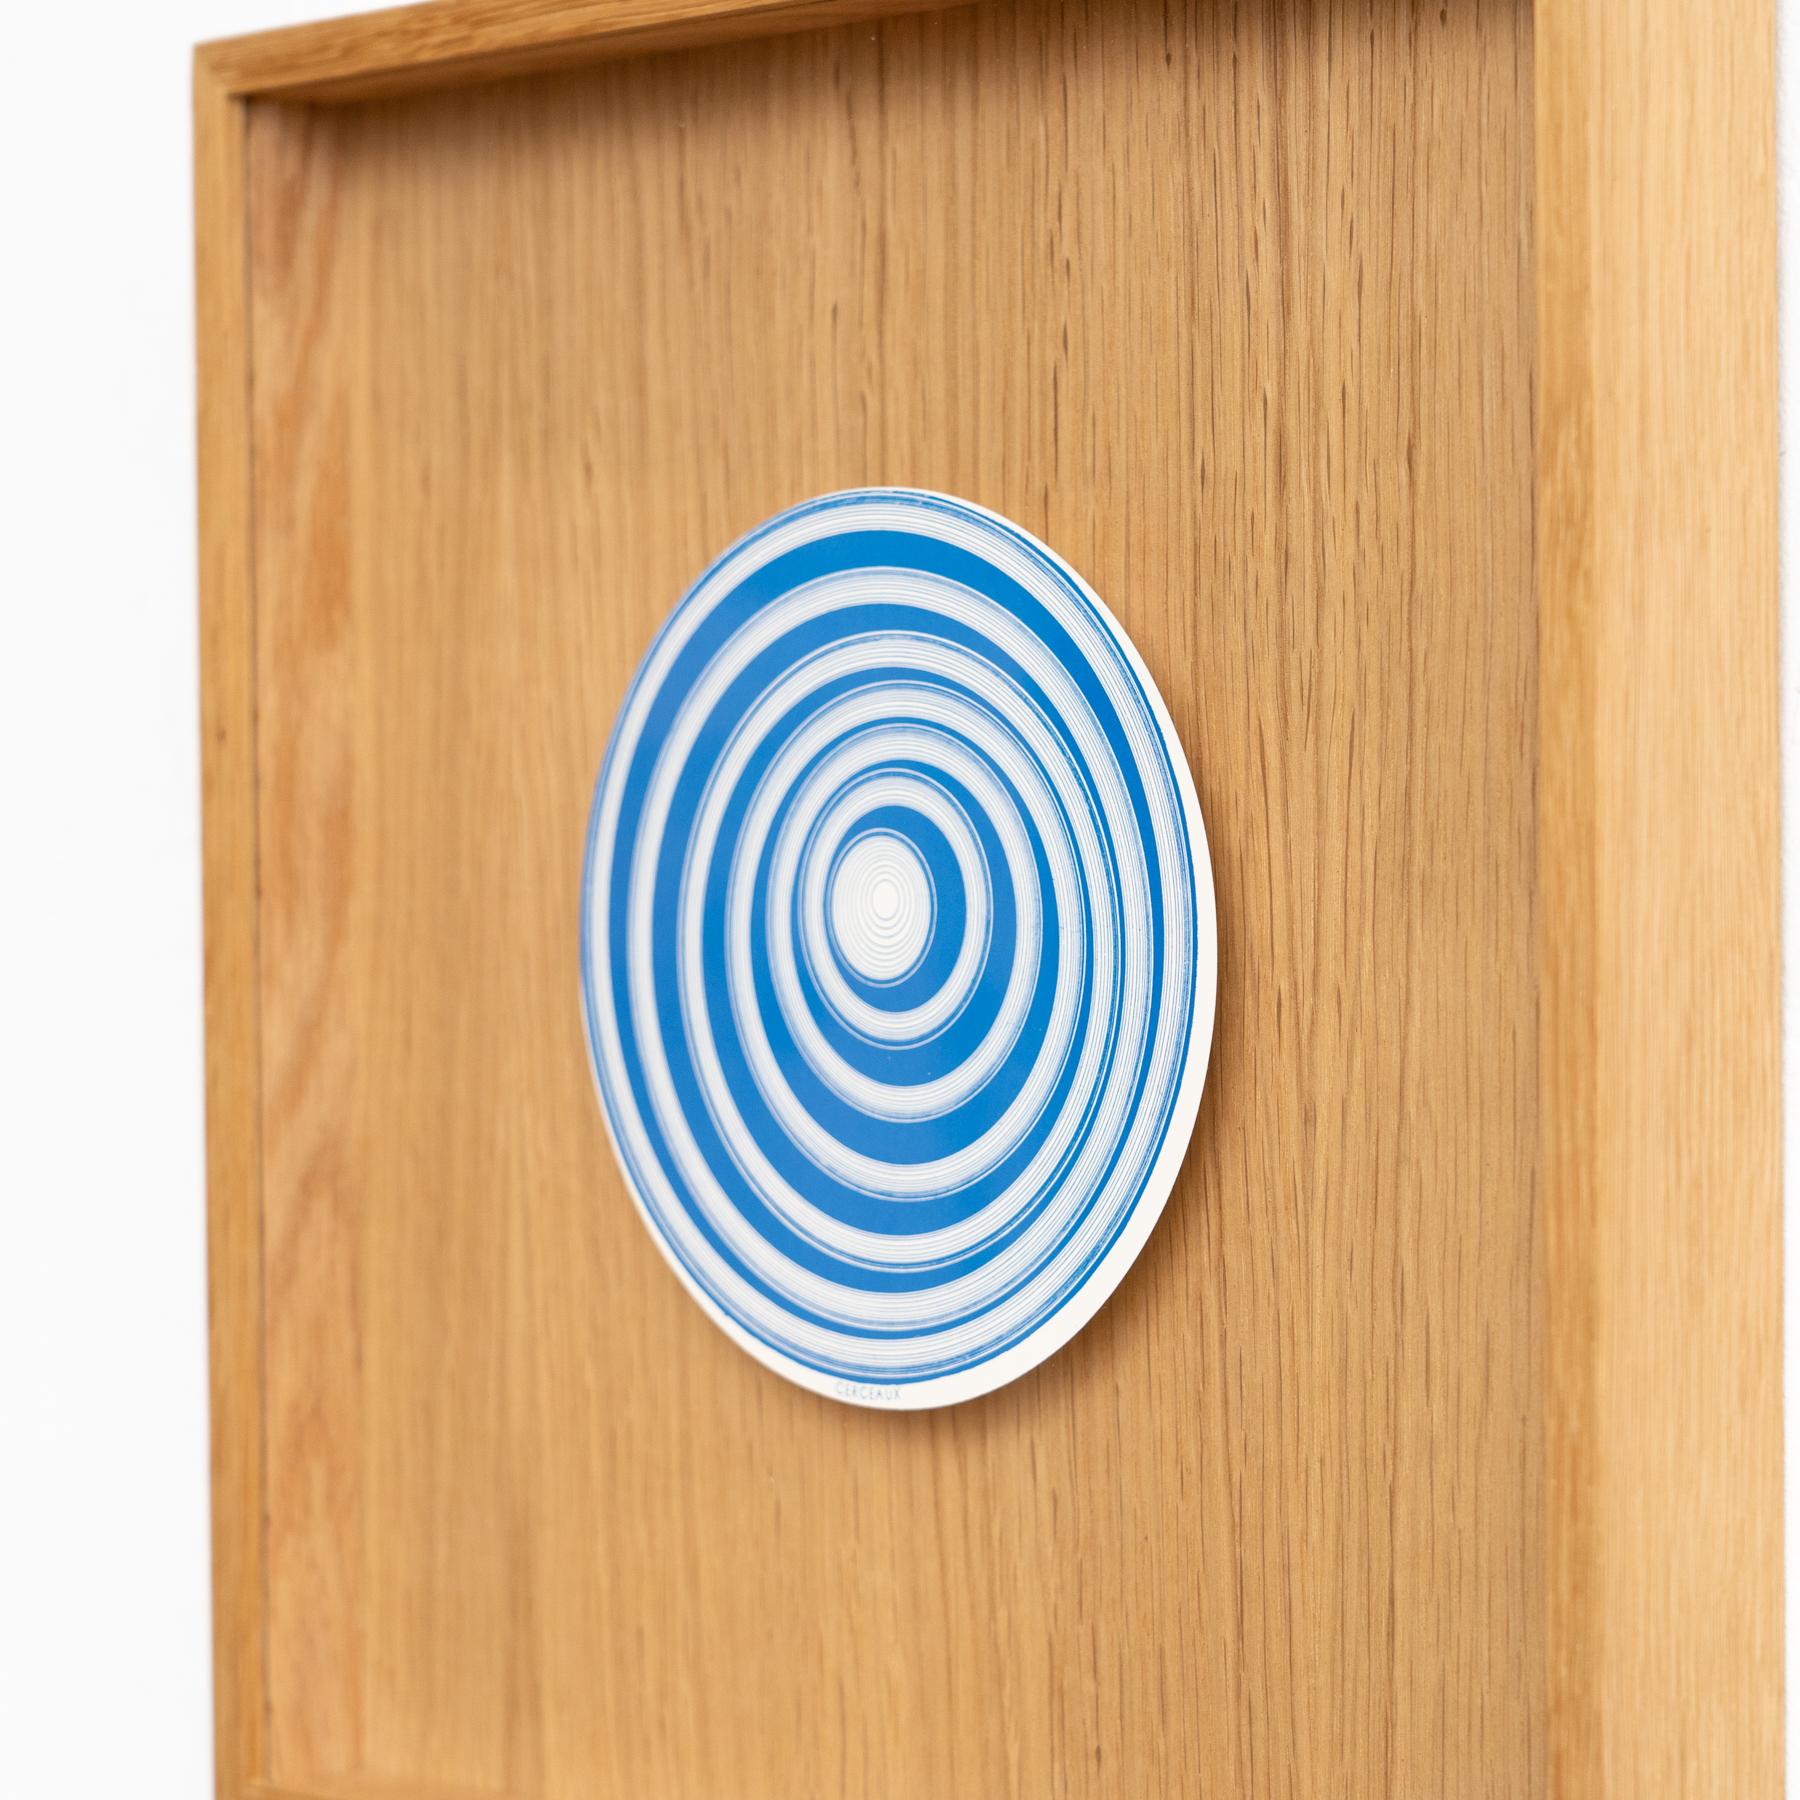 Marcel Duchamp Blue and White Cerceaux Rotorelief by Konig Series 133, 1987 For Sale 1